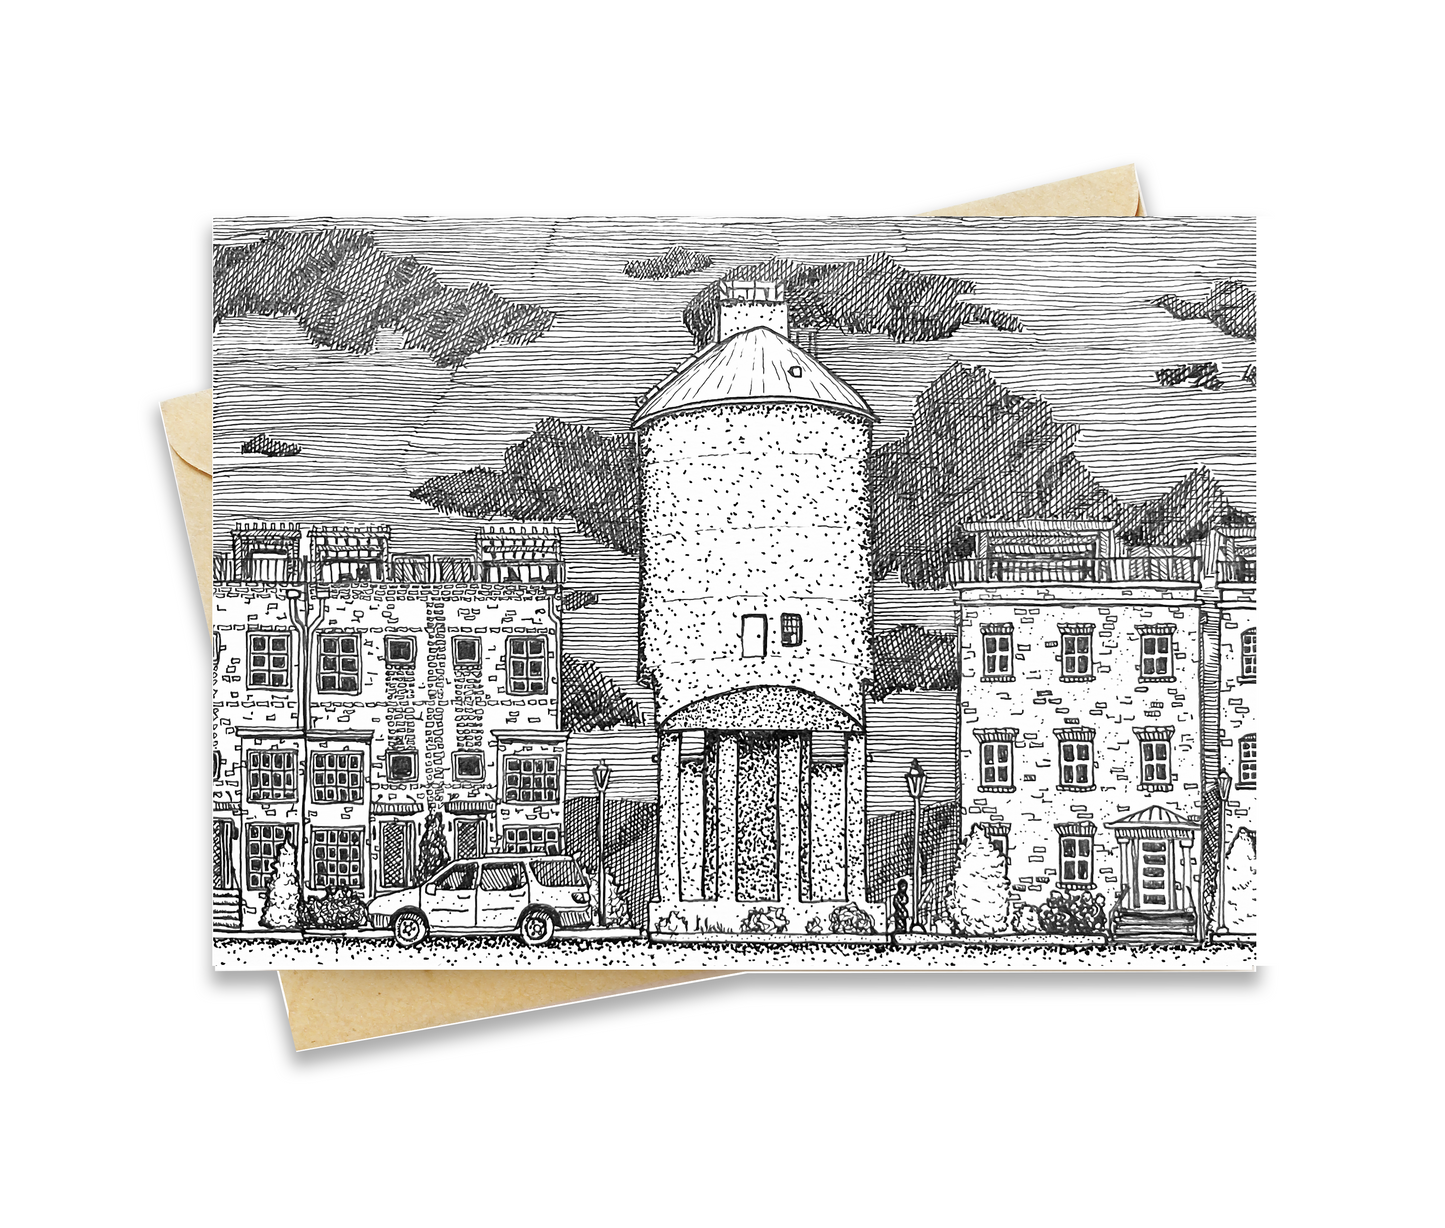 BellavanceInk: Greeting Card With Charlottesville's City Walk And Train Silo Tower 5 x 7 Inches